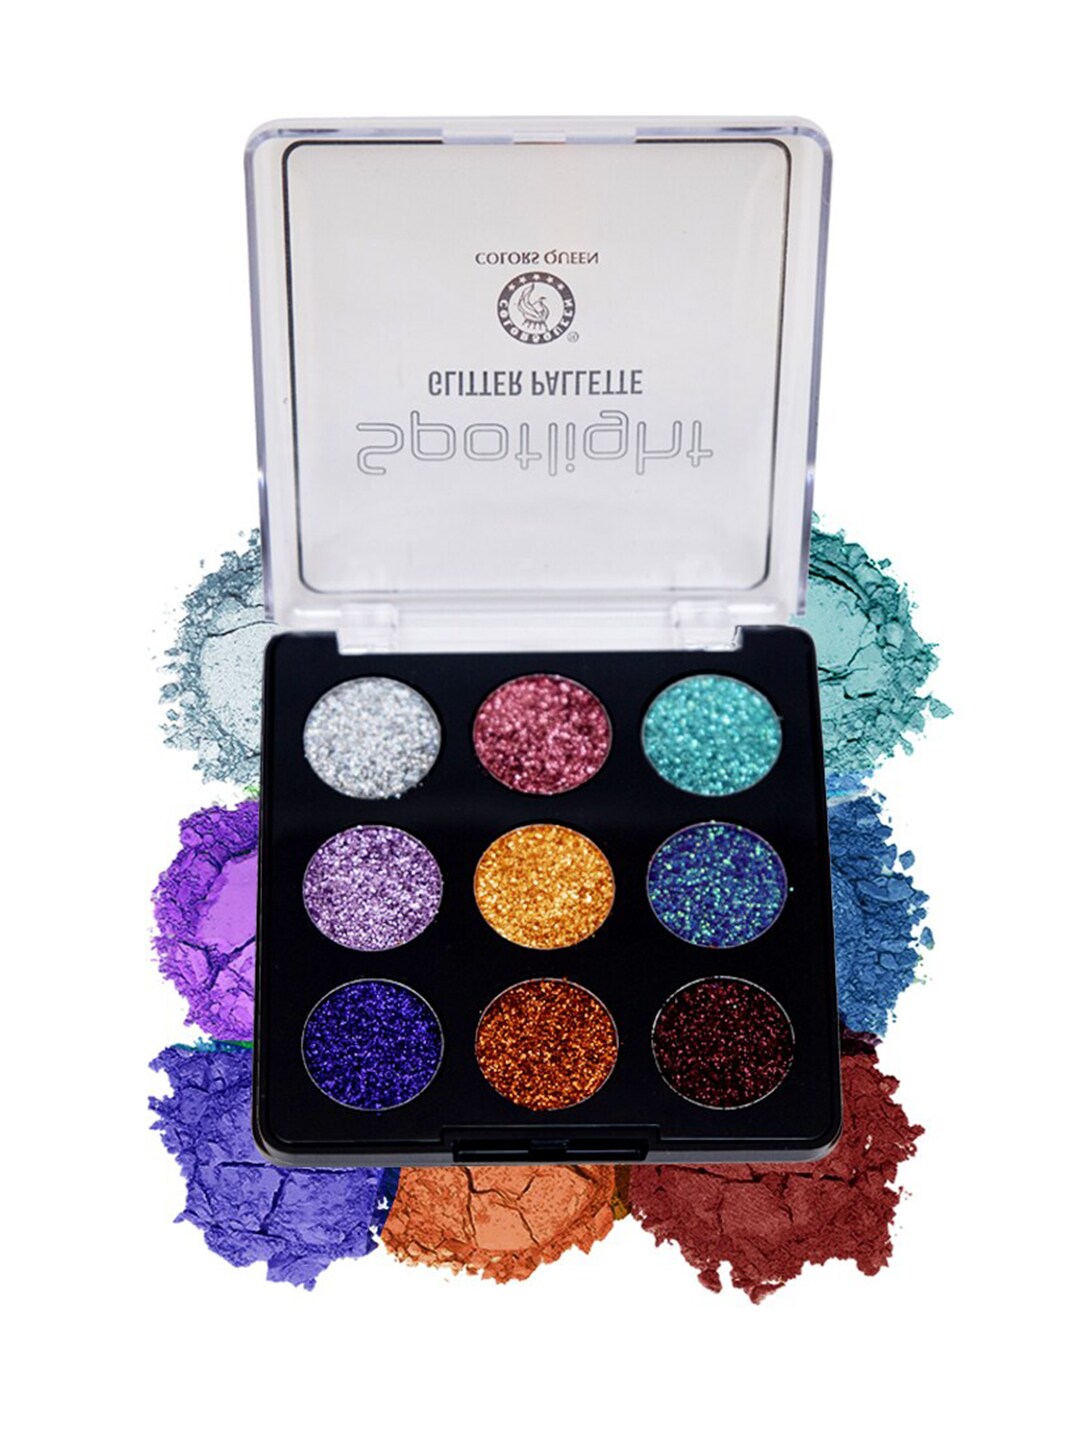 Colors Queen Spotlight Glitter Eyeshadow Palette 14g Price in India